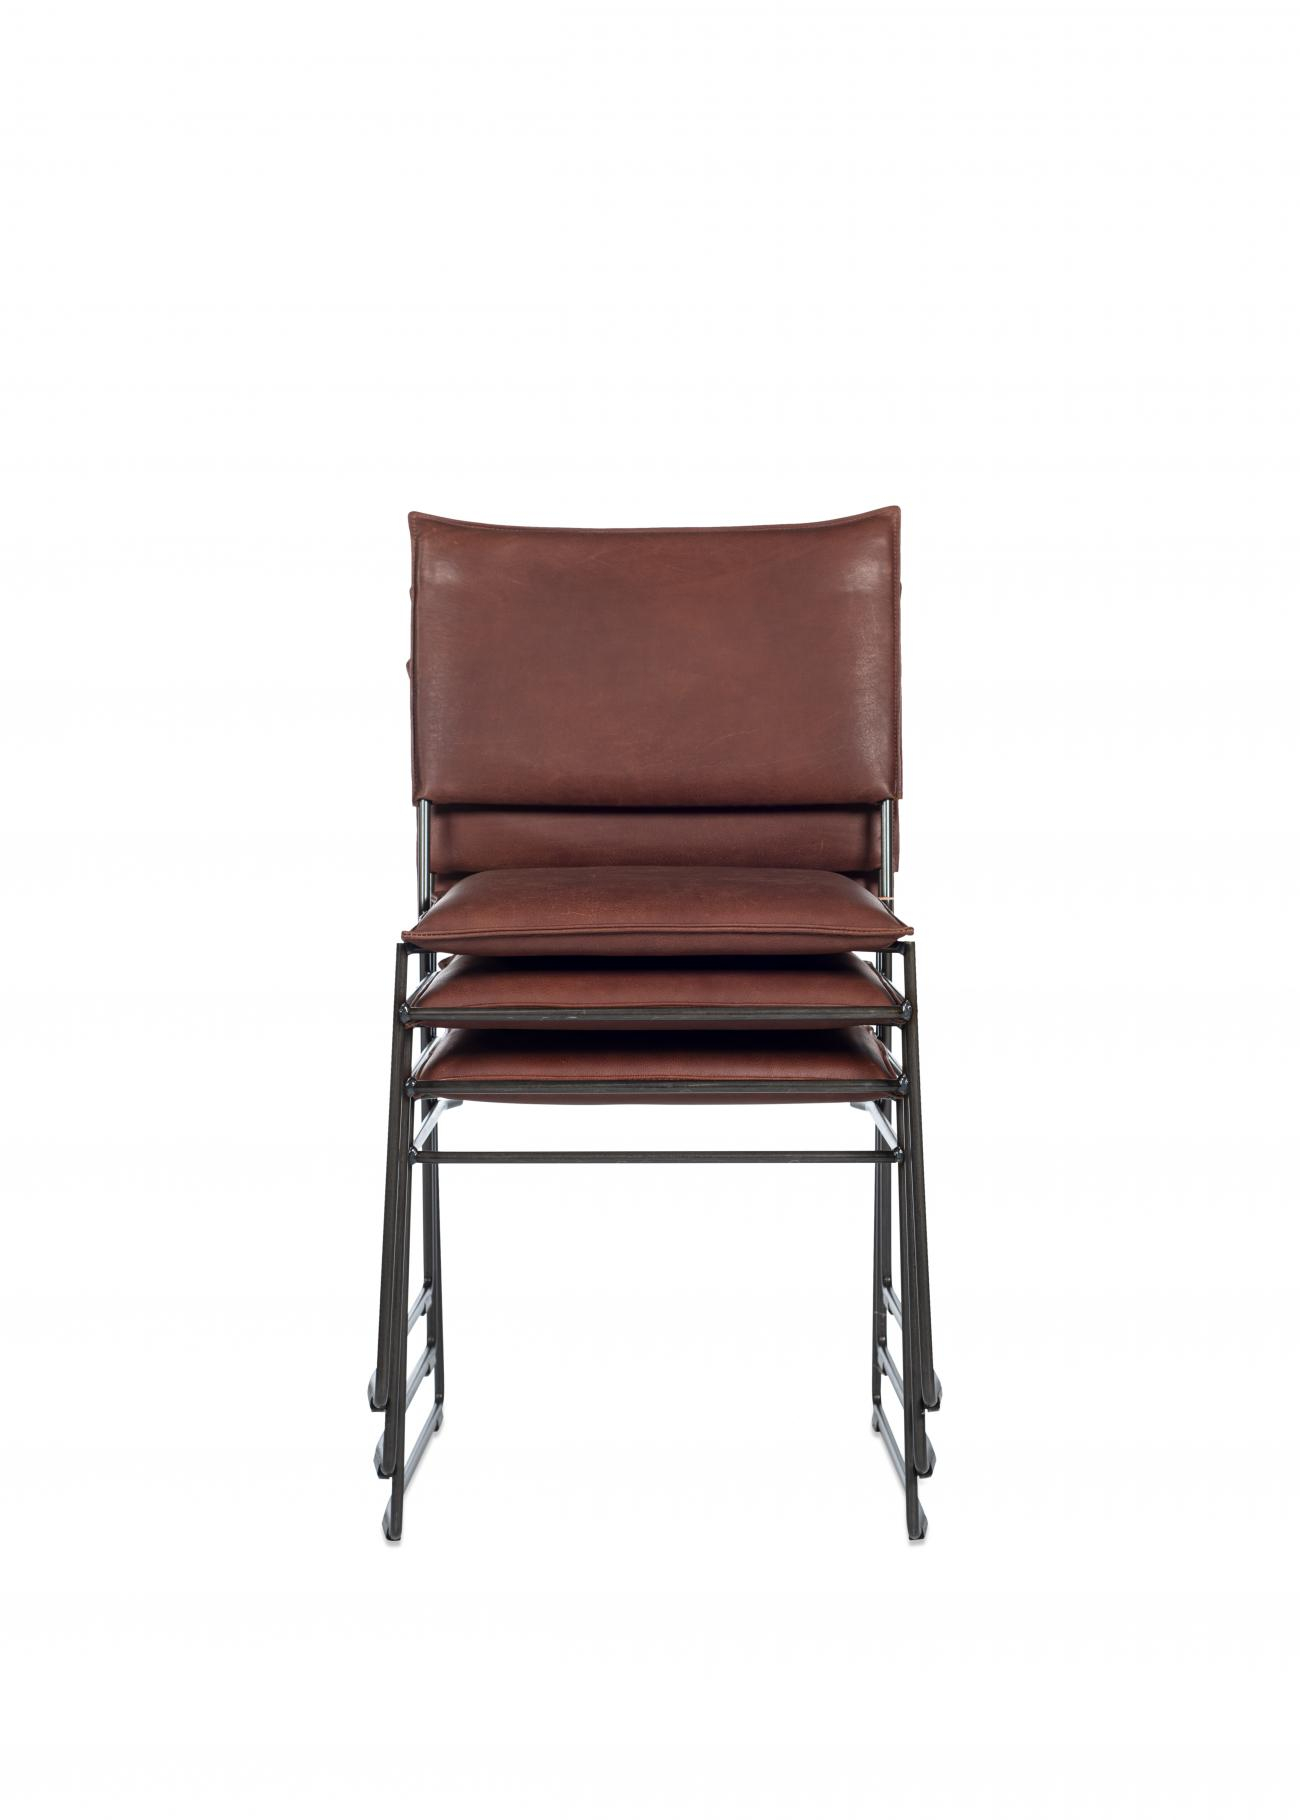 https://www.fundesign.nl/media/catalog/product/n/o/norman_dining_chair_old_glory_stackable_bonanza_british_tan_front.jpg